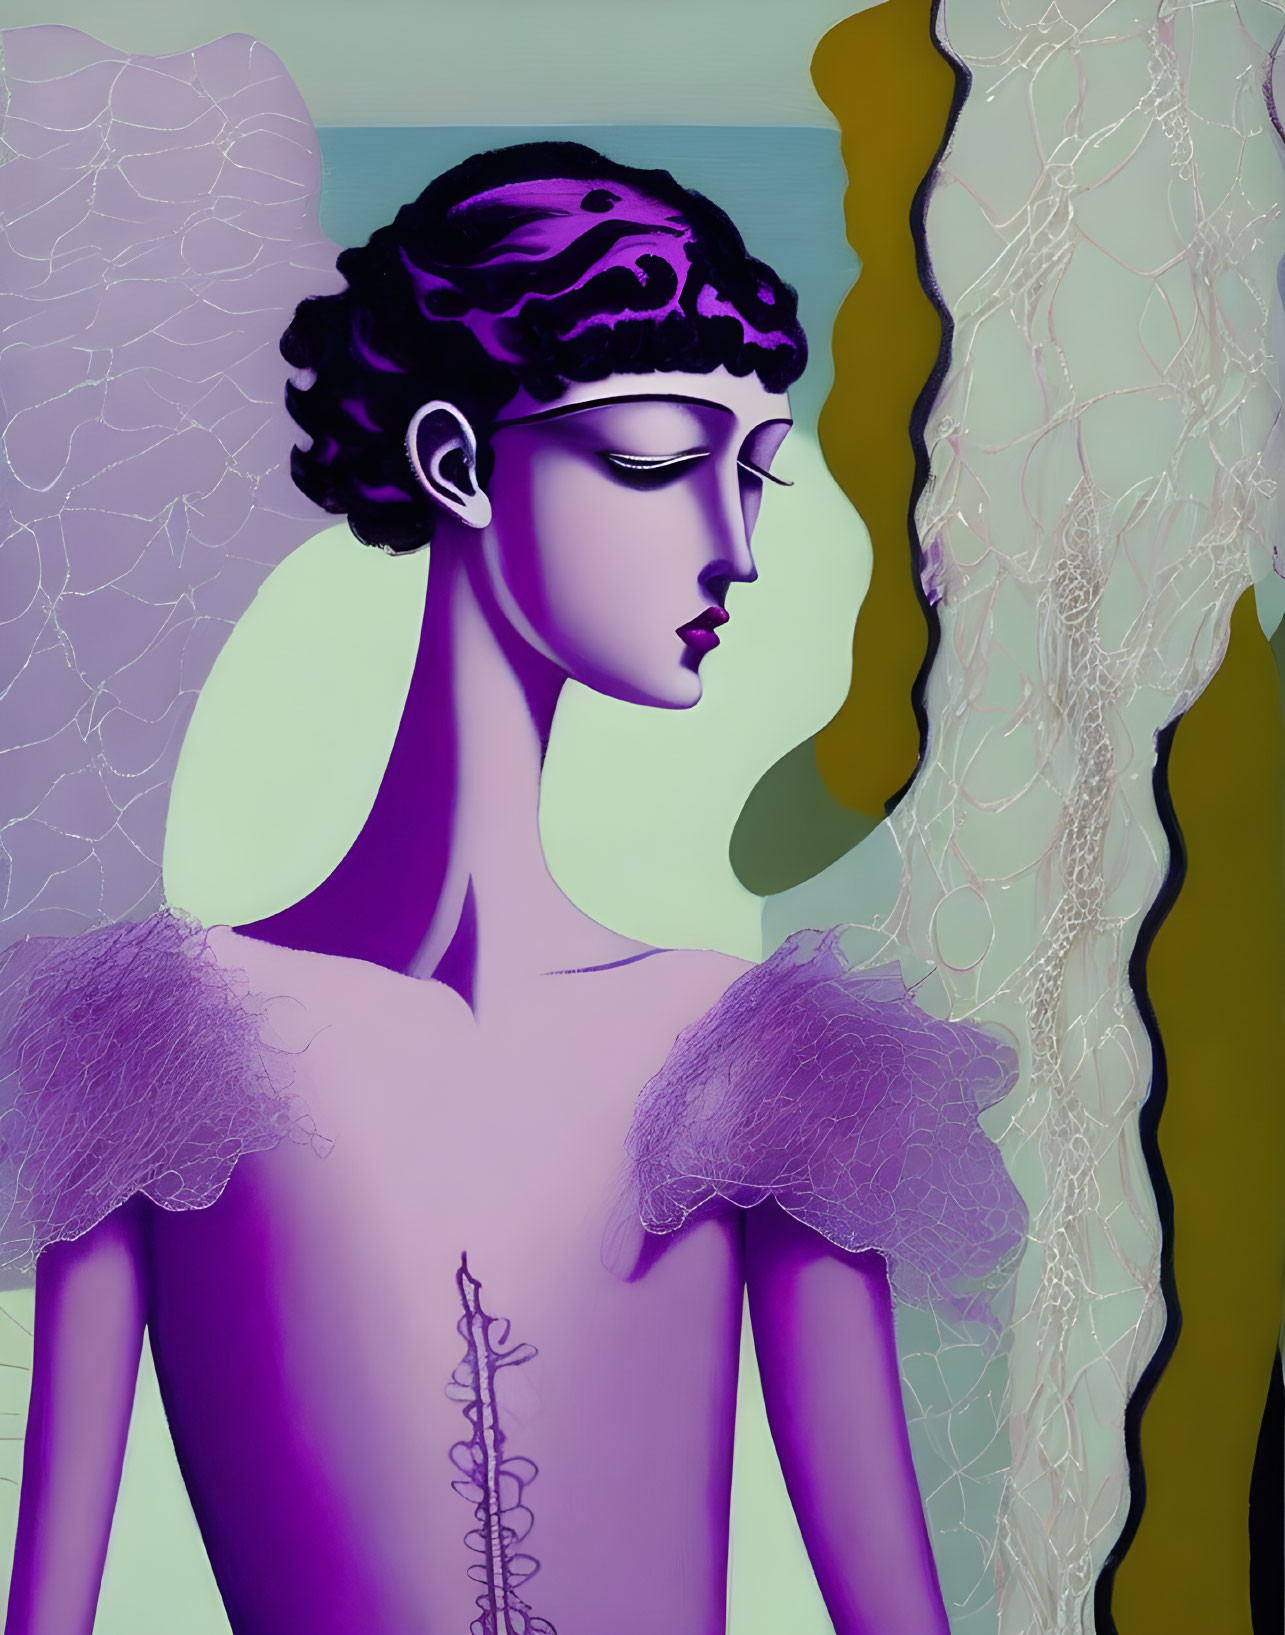 Purple-skinned person with classical hairdo and elegant dress against abstract background